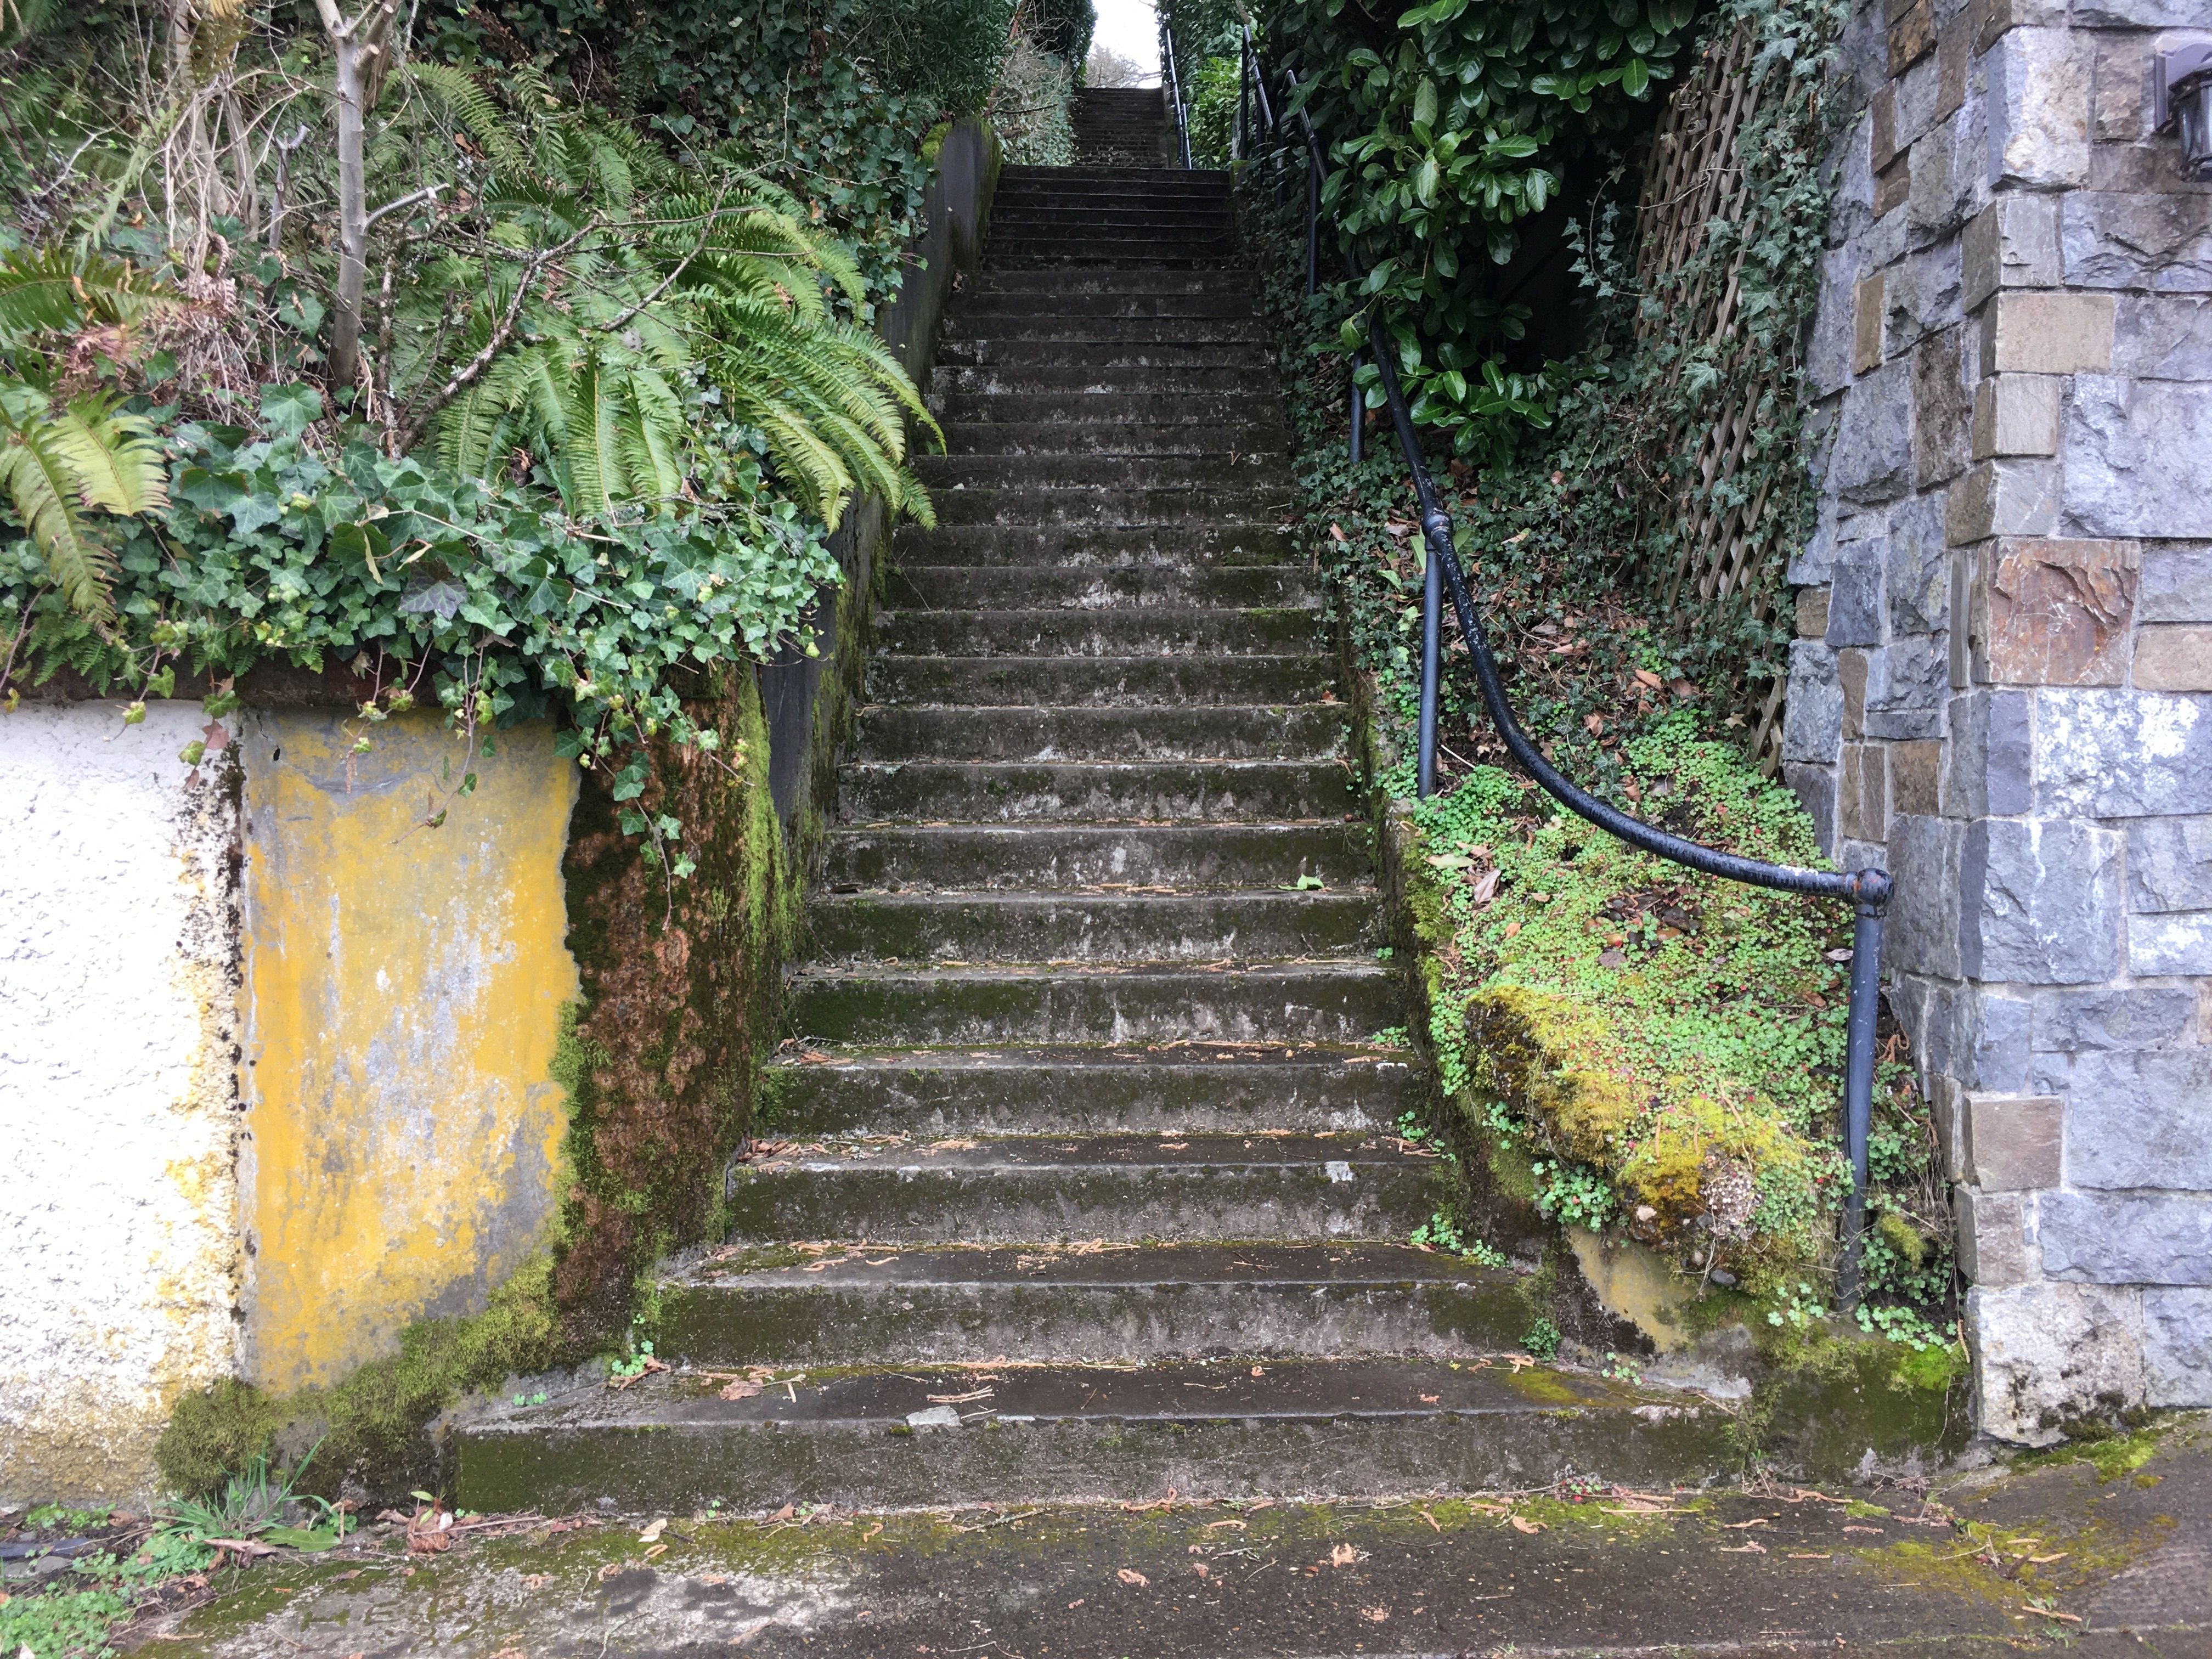 Mossy concrete steps rising; ivy and ferns spill over the sides.